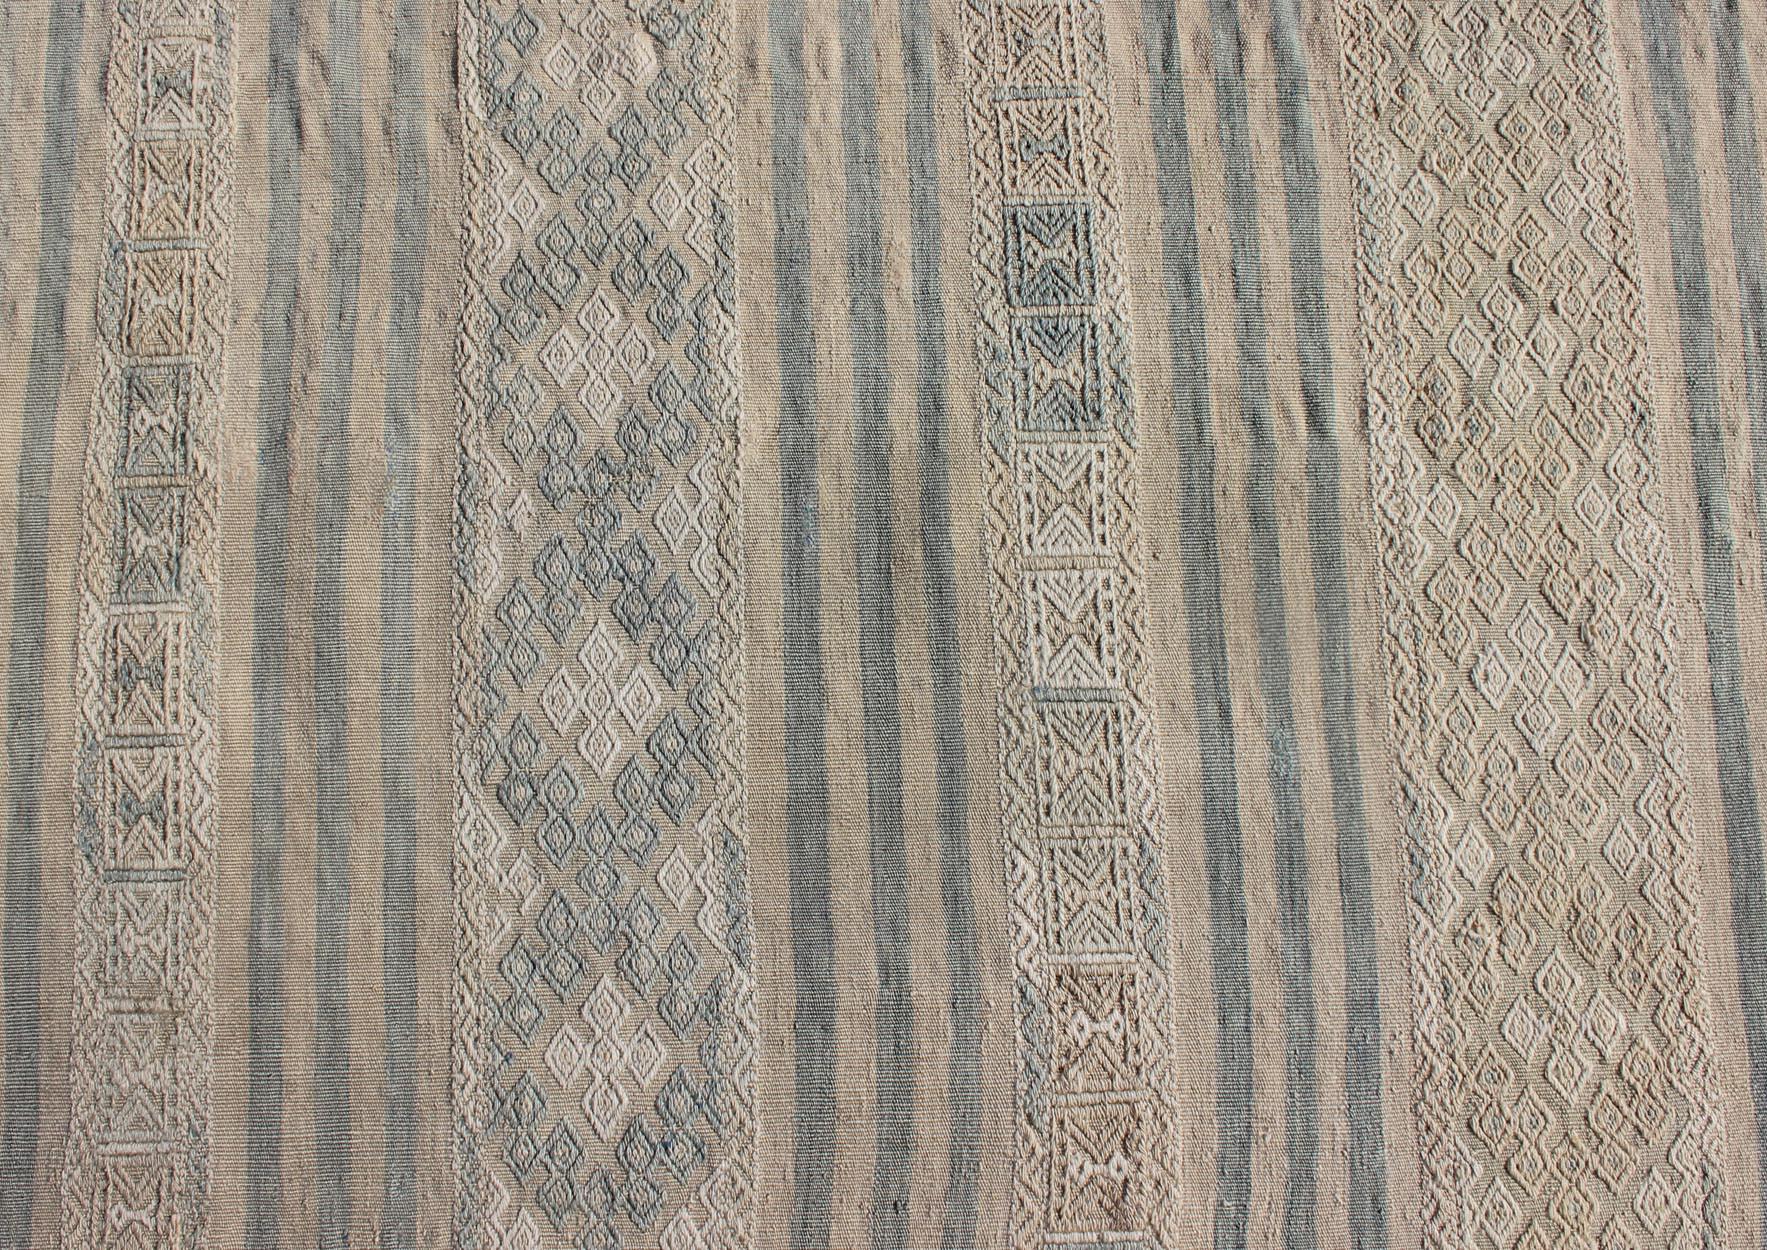 Flat-Weave Kilim with Embroideries in Taupe, Tan, Blue and Gray For Sale 3